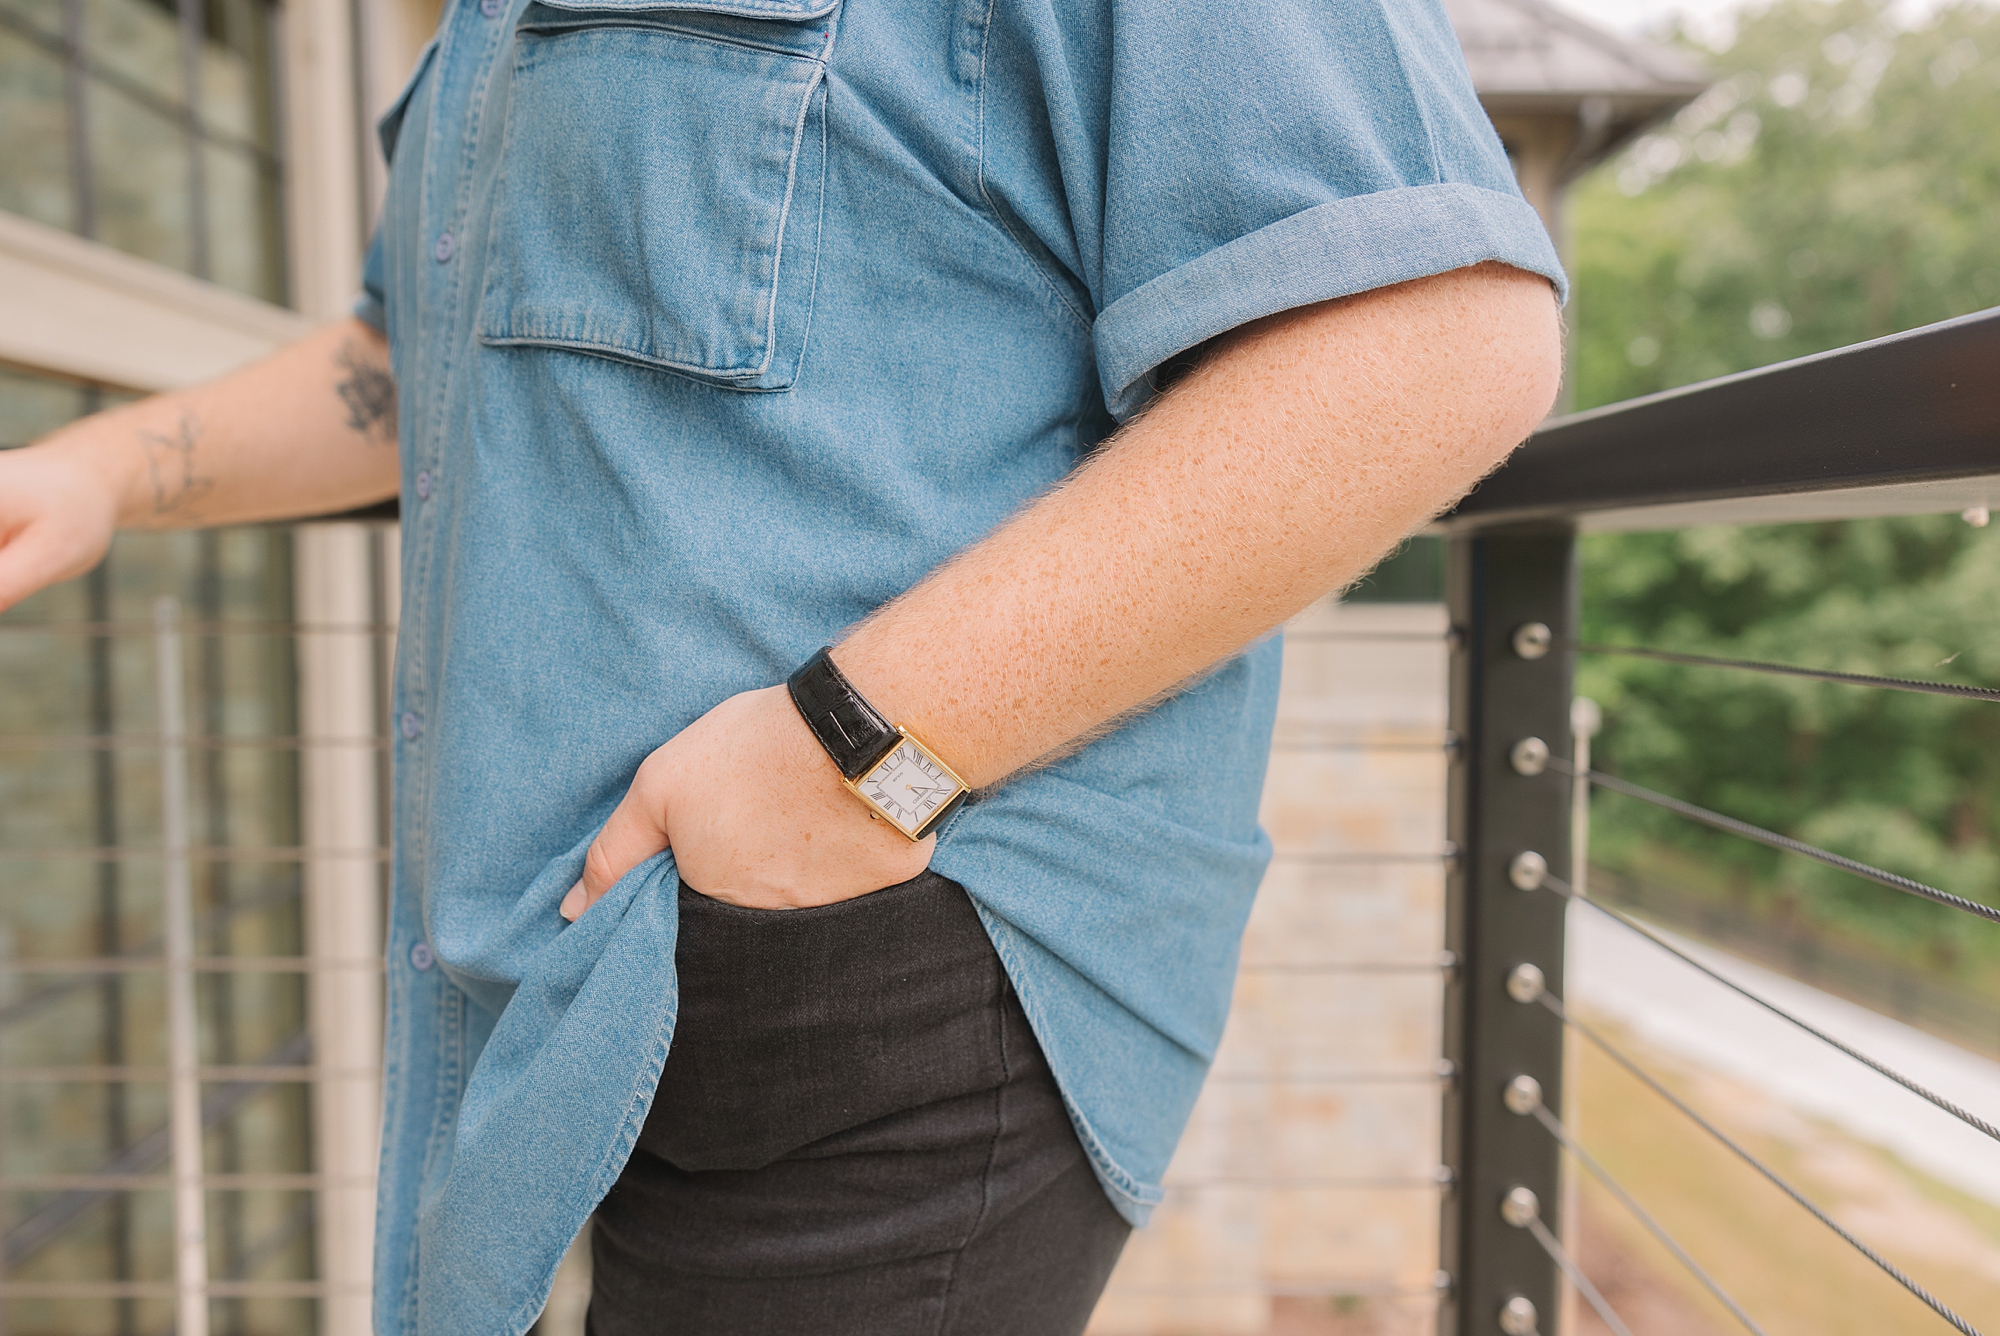 man in blue shirt stands with hand in pocket showing off watch